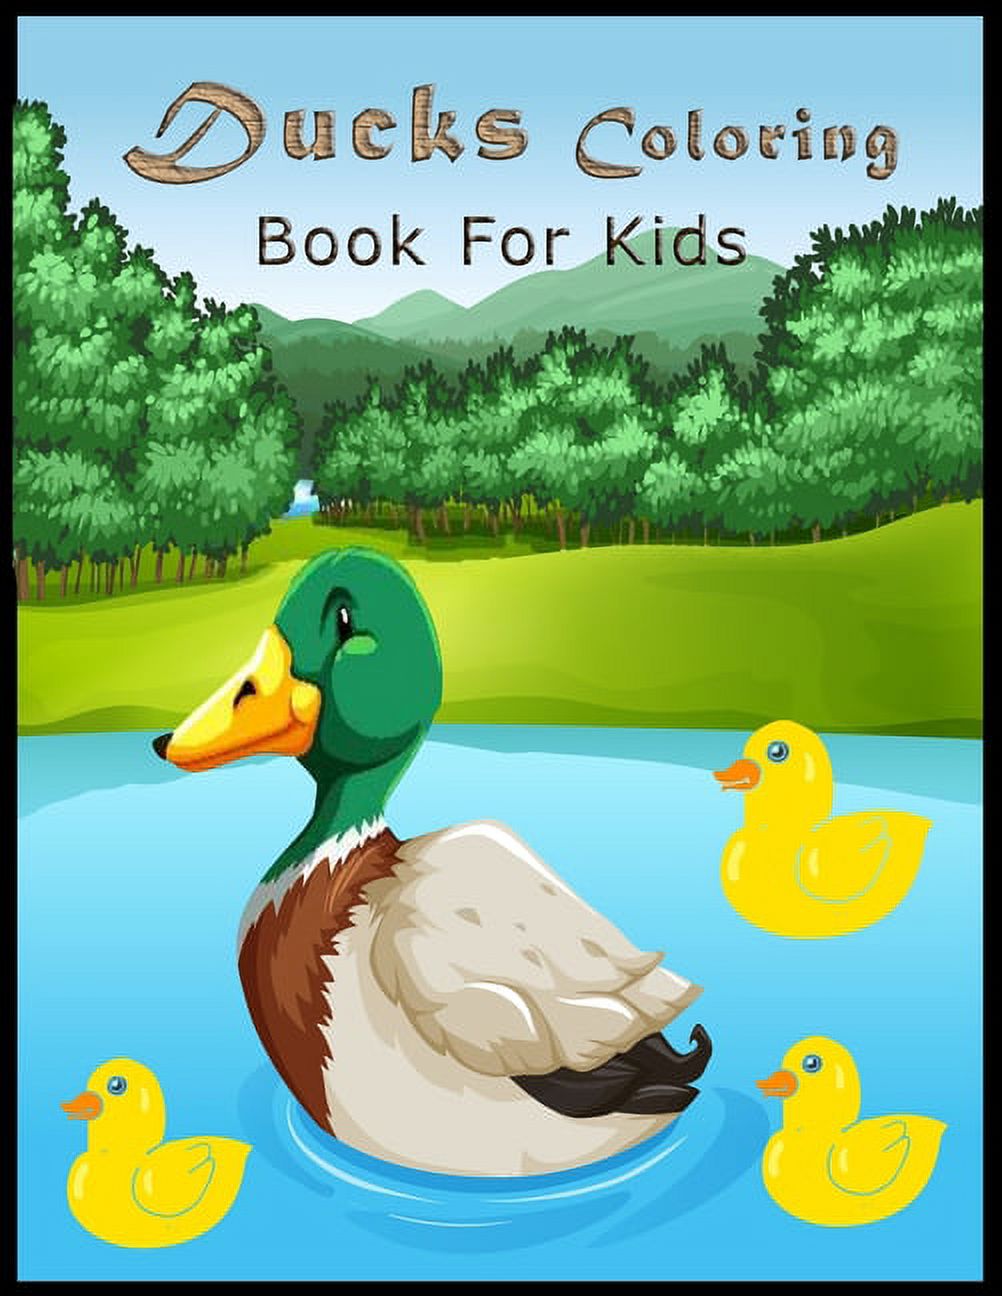 Ducks　Book　Kids,　Girls.　Coloring　Book　For　(Paperback)　Kids　Pages　Activity　Draw　for　Boys　Ducks　Coloring　For　Kids　Coloring　Ducks